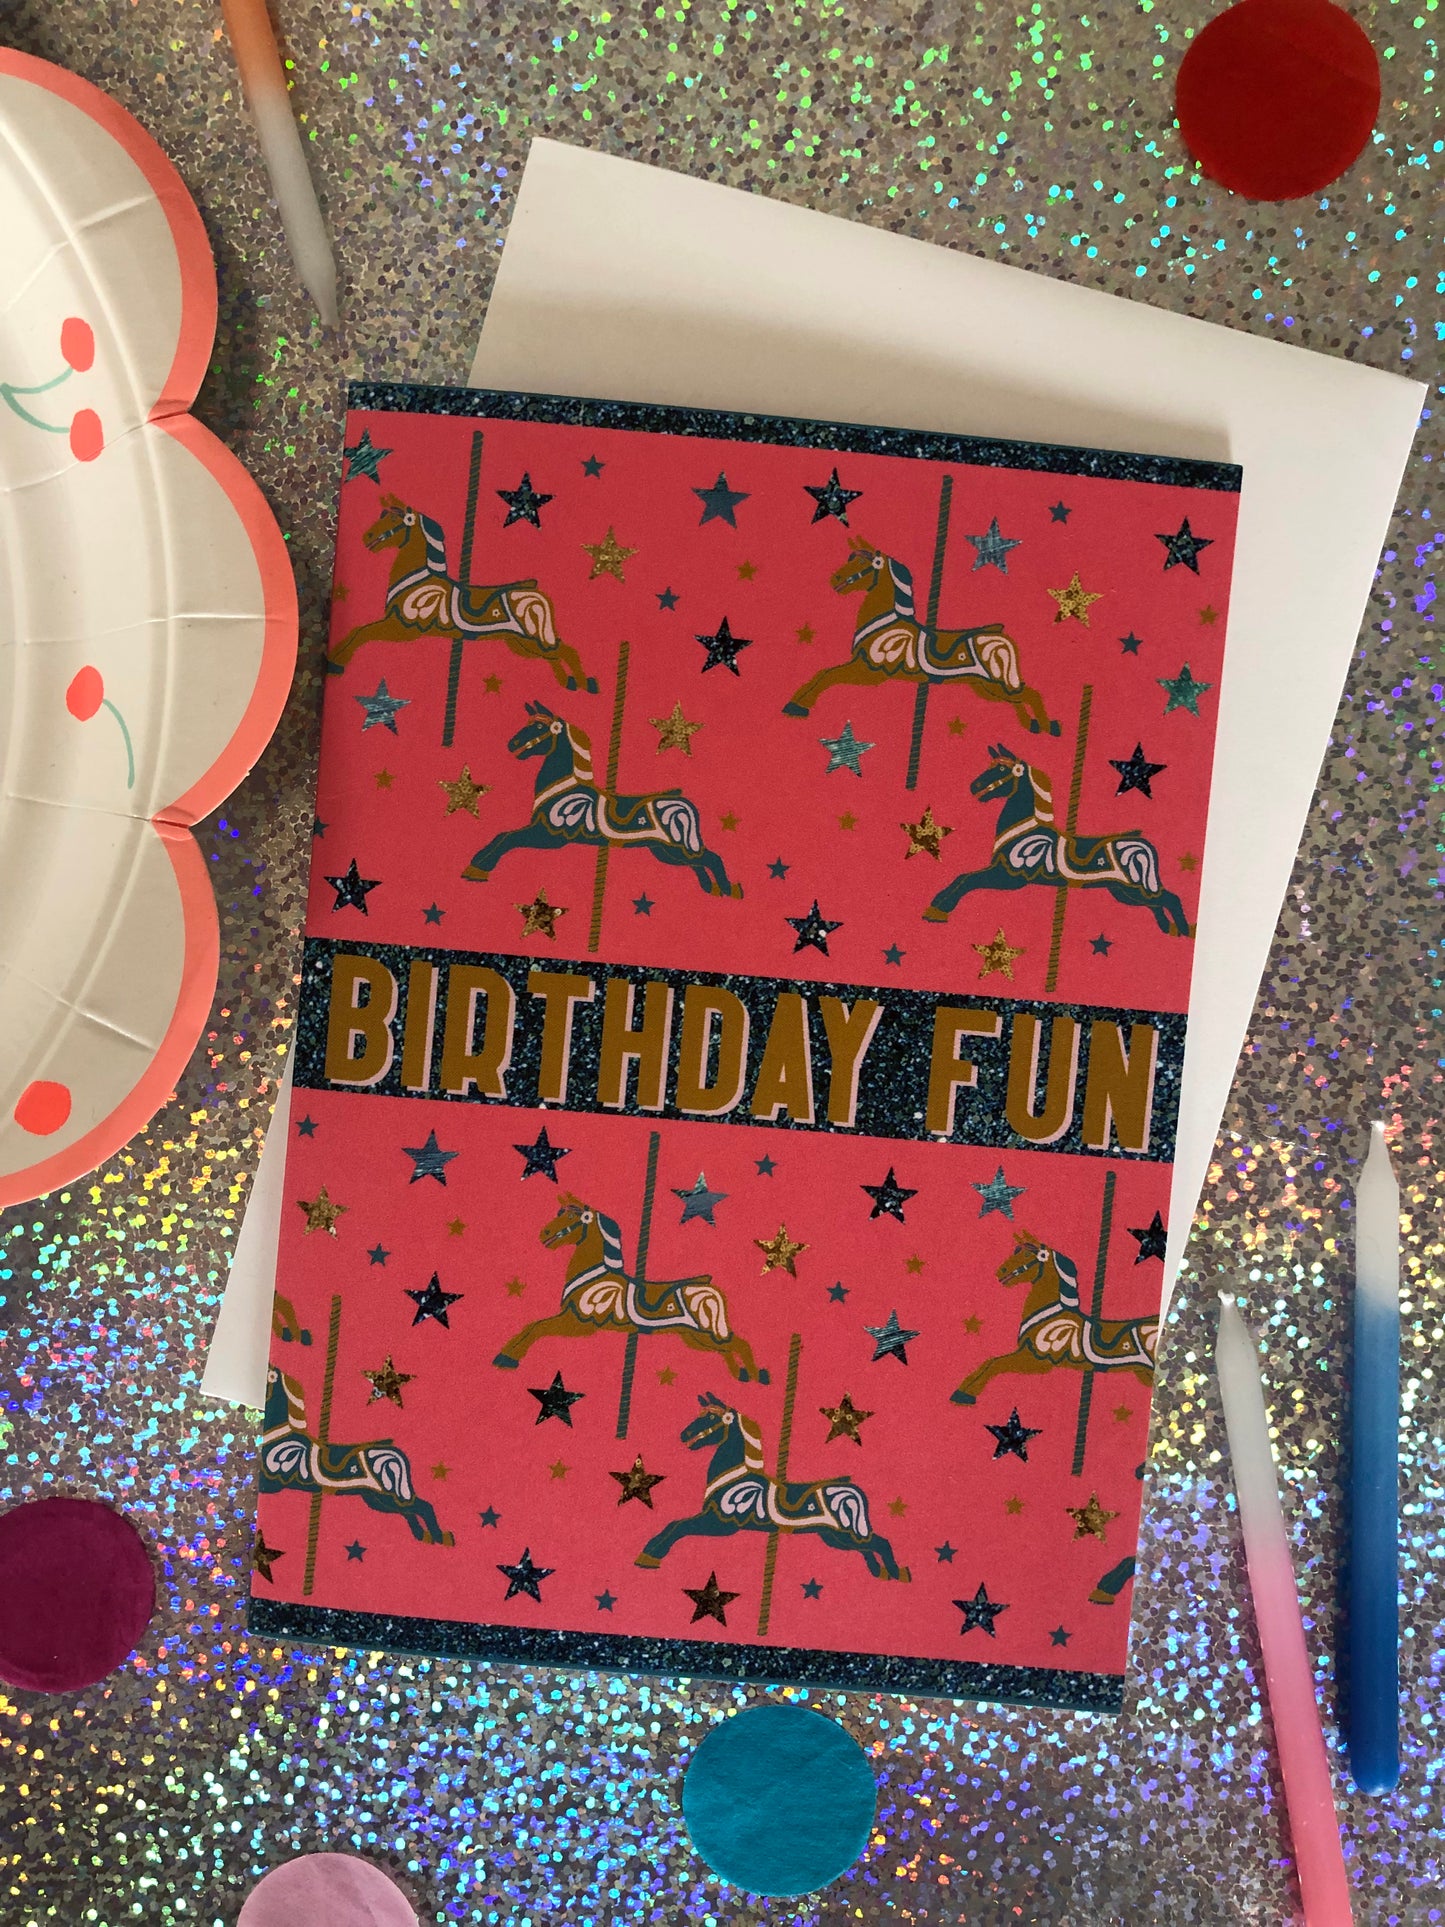 Bright and fun birthday card featuring a carousel horse design on a holographic background